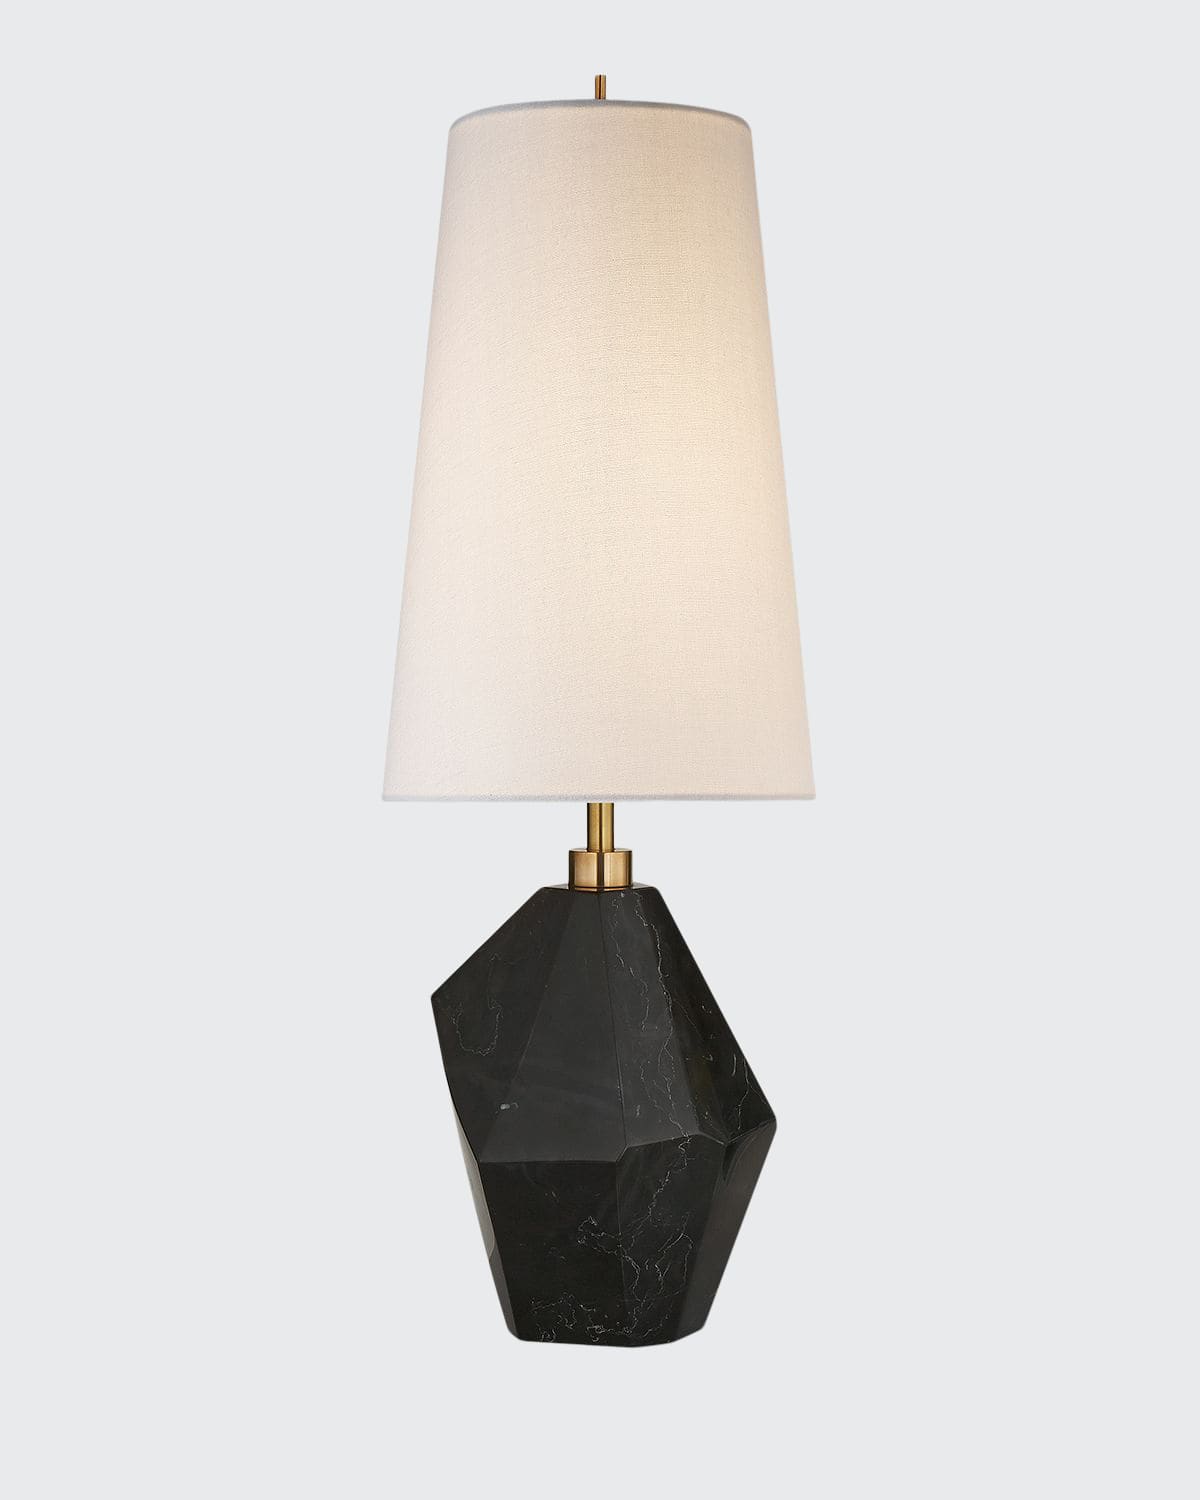 Kelly Wearstler For Visual Comfort Signature Halcyon Small Accent Lamp In Black Cremo Marbl